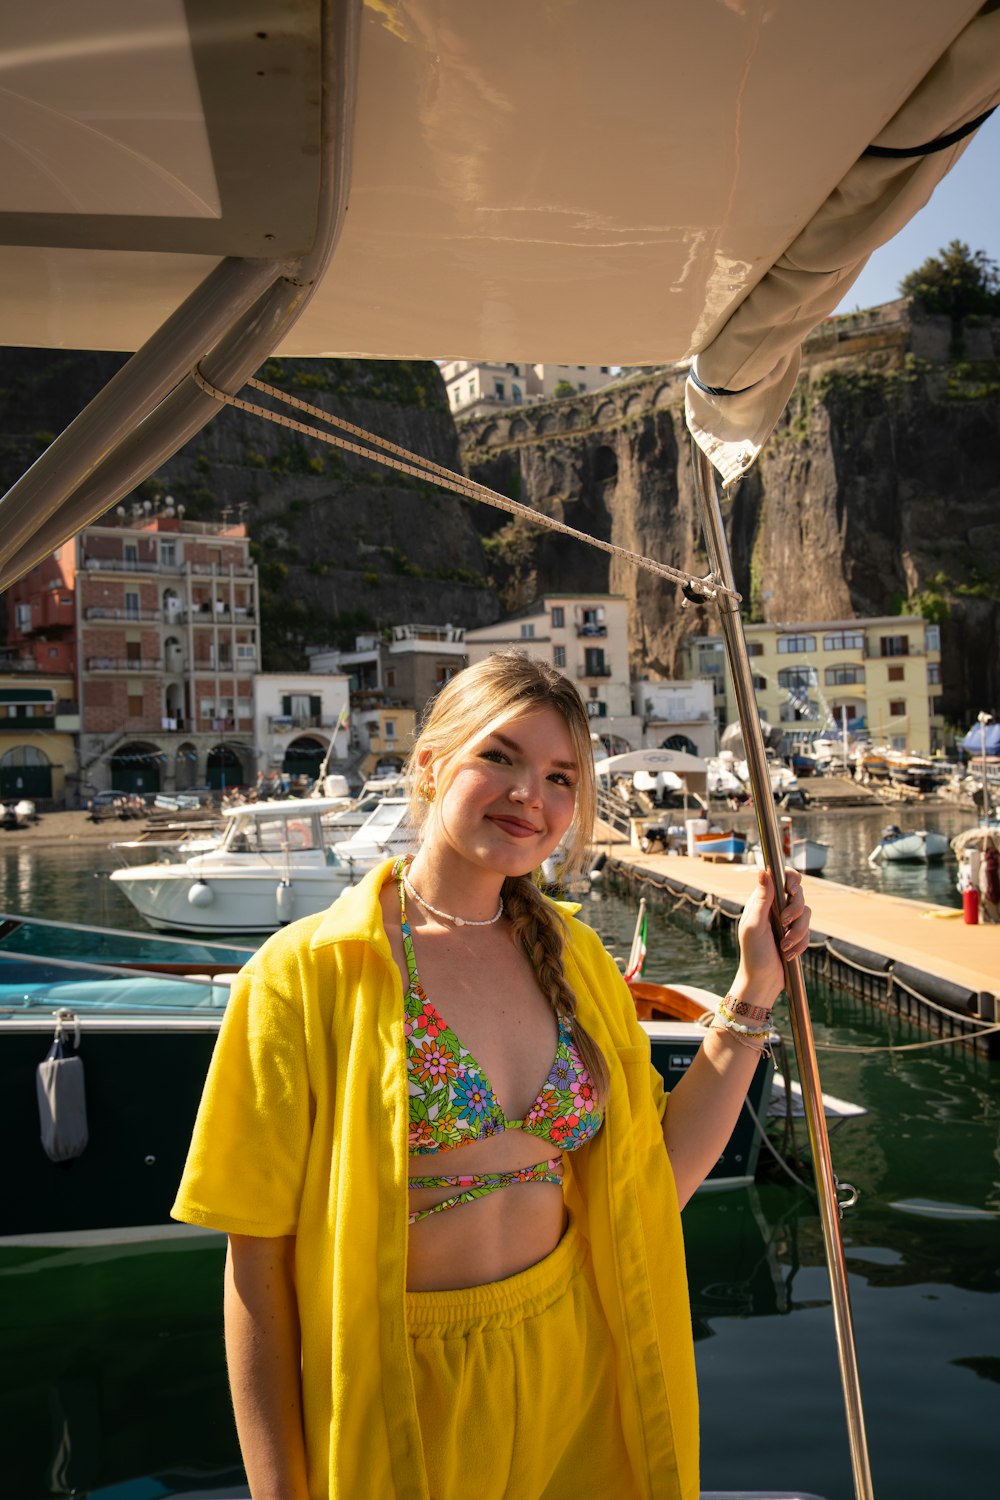 a woman standing on a boat holding a pole